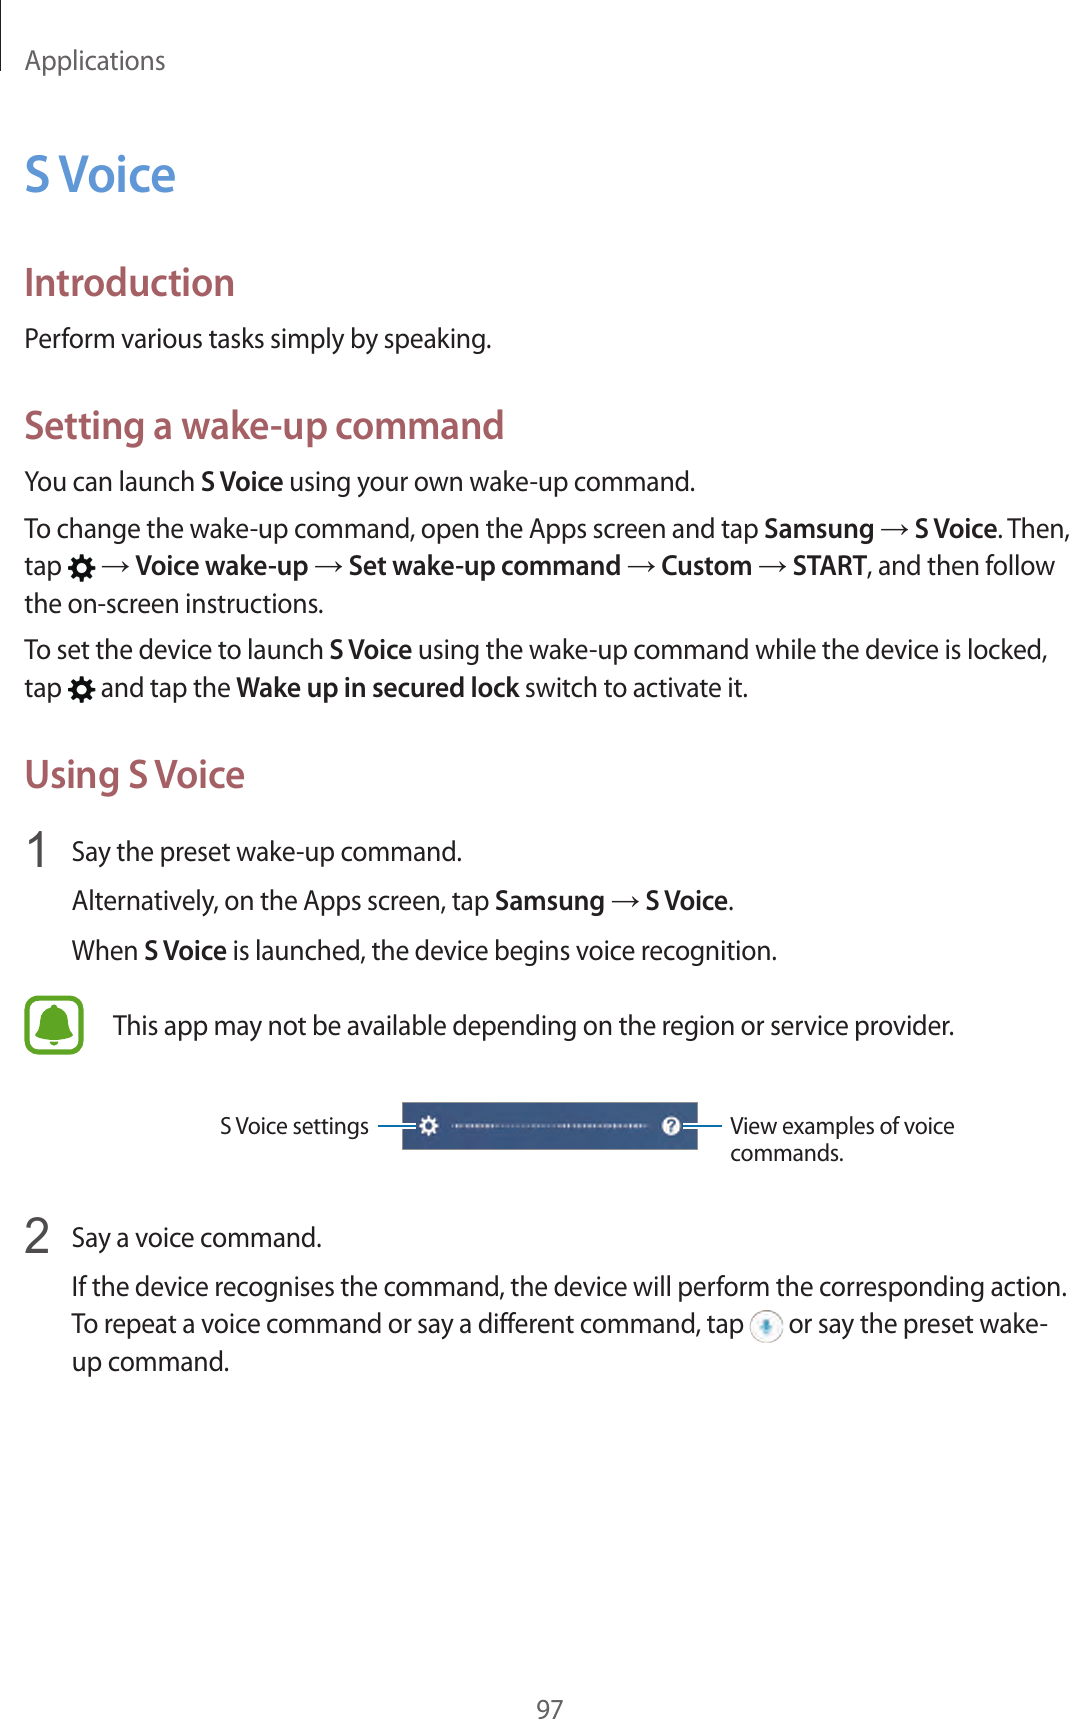 Applications97S VoiceIntroductionPerform various tasks simply by speaking.Setting a wake-up commandYou can launch S Voice using your own wake-up command.To change the wake-up command, open the Apps screen and tap Samsung → S Voice. Then, tap   → Voice wake-up → Set wake-up command → Custom → START, and then follow the on-screen instructions.To set the device to launch S Voice using the wake-up command while the device is locked, tap   and tap the Wake up in secured lock switch to activate it.Using S Voice1  Say the preset wake-up command.Alternatively, on the Apps screen, tap Samsung → S Voice.When S Voice is launched, the device begins voice recognition.This app may not be available depending on the region or service provider.View examples of voice commands.S Voice settings2  Say a voice command.If the device recognises the command, the device will perform the corresponding action. To repeat a voice command or say a different command, tap   or say the preset wake-up command.